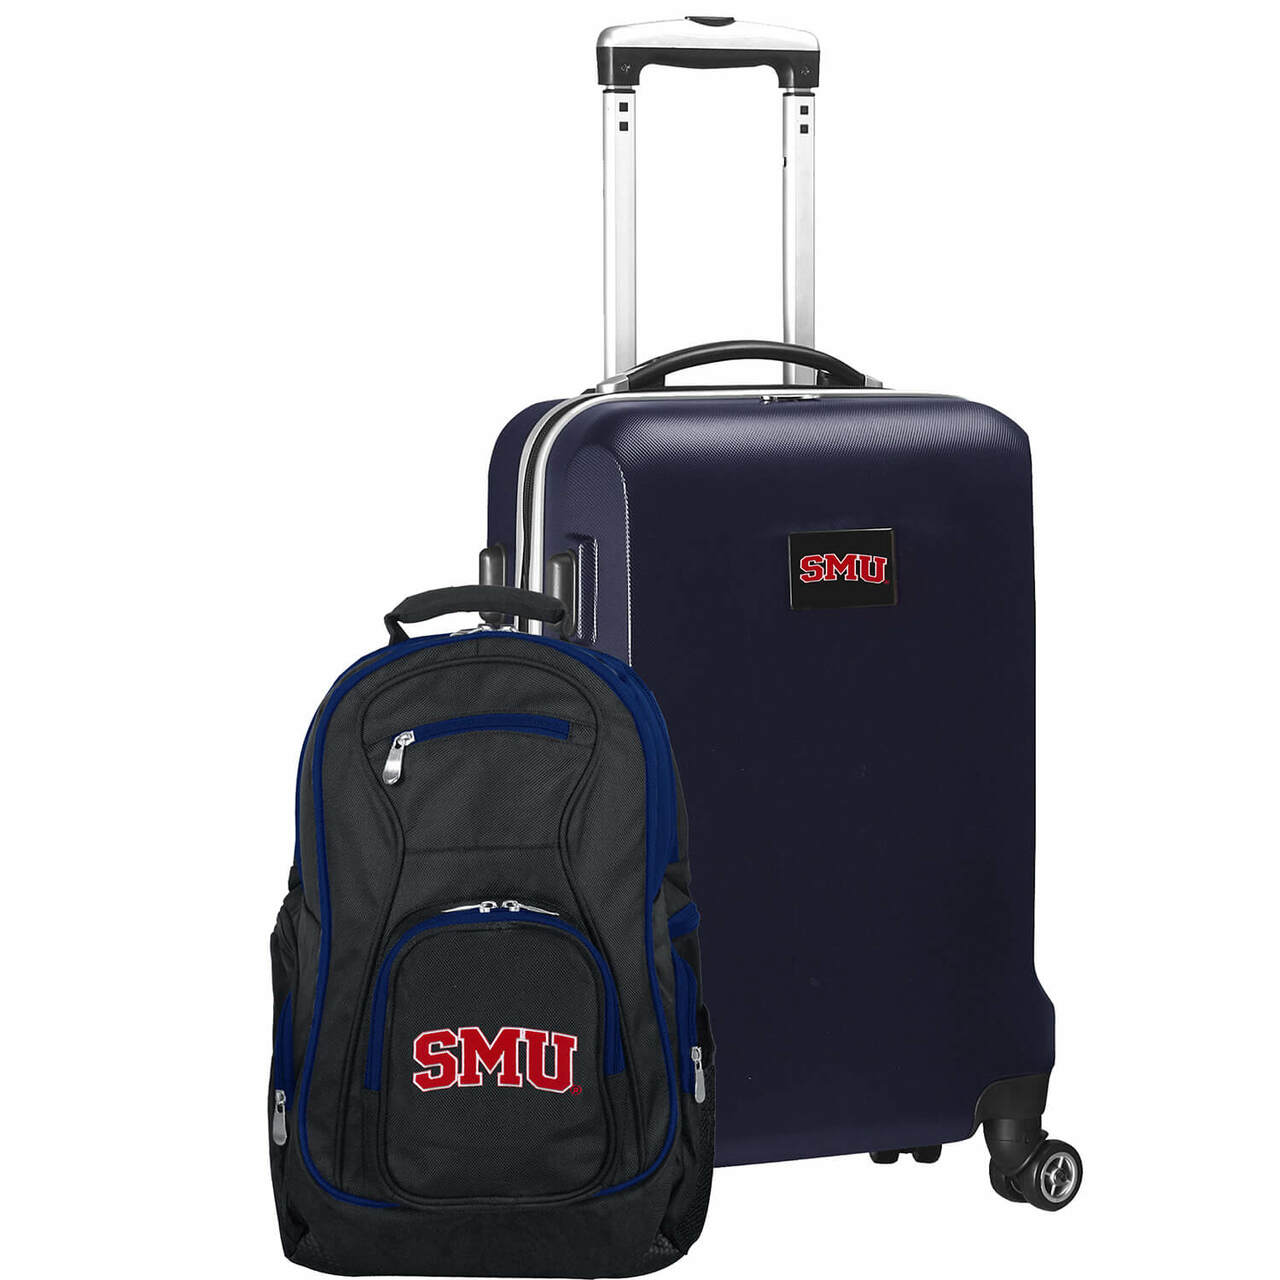 Southern Methodist Mustangs Deluxe 2-Piece Backpack and Carry-on Set in Navy